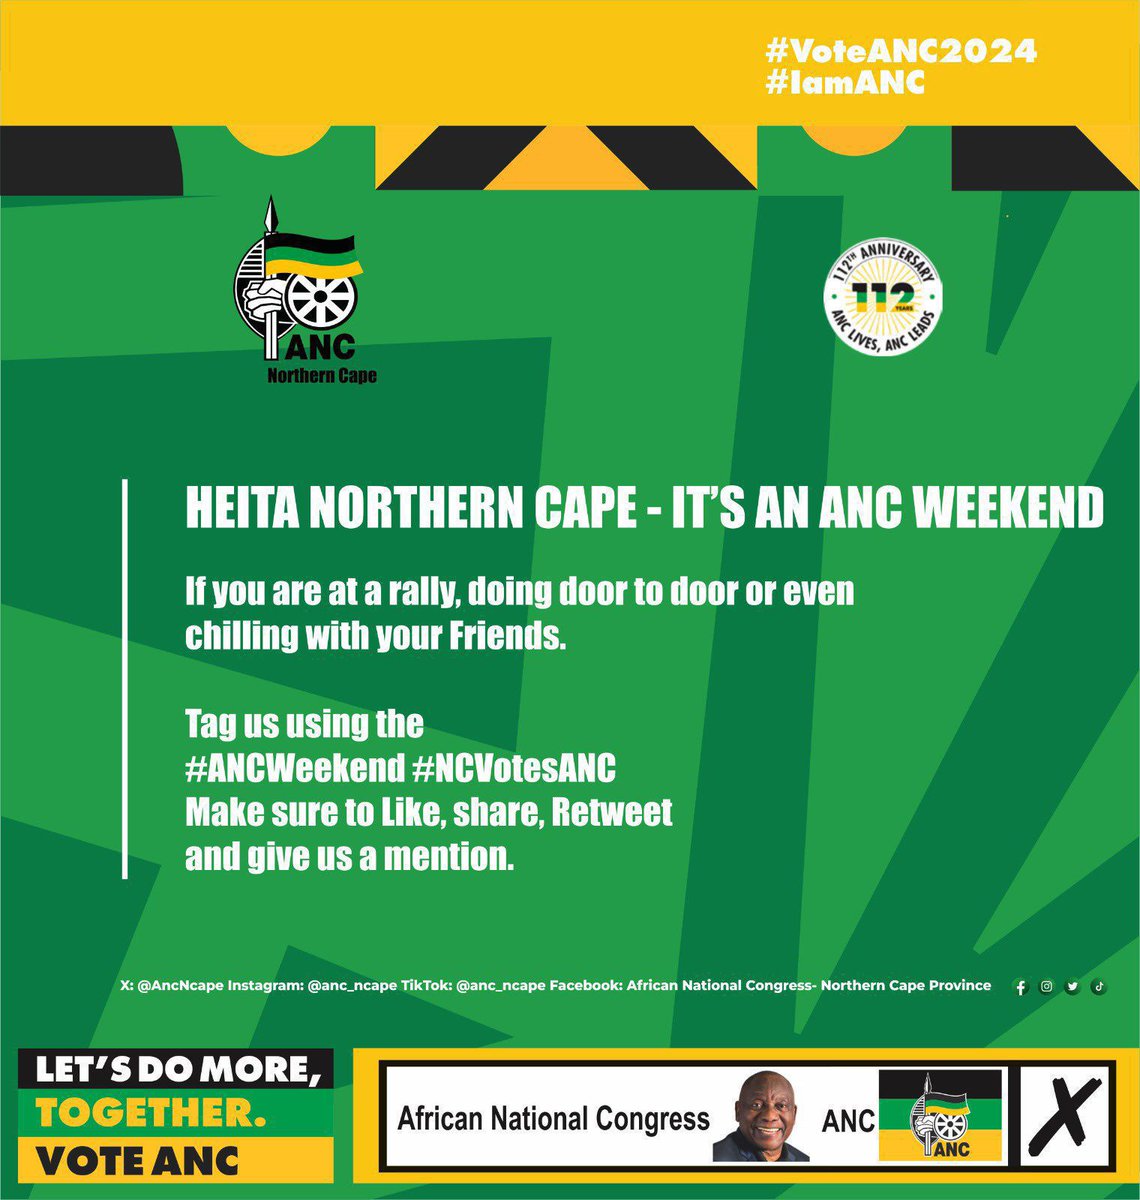 🚨🚨ANC SHOUT OUT 🔊🔊

It’s a ANC Weekend and we call upon all ANC Supporters to tag us by using #ANCWeekend and #NCVotesANC.

Make sure you Like, Share, Retweet and give us a mention.

#ANCWeekend
#NCVotesANC
#VoteANC2024
#LetsDoMoreTogther